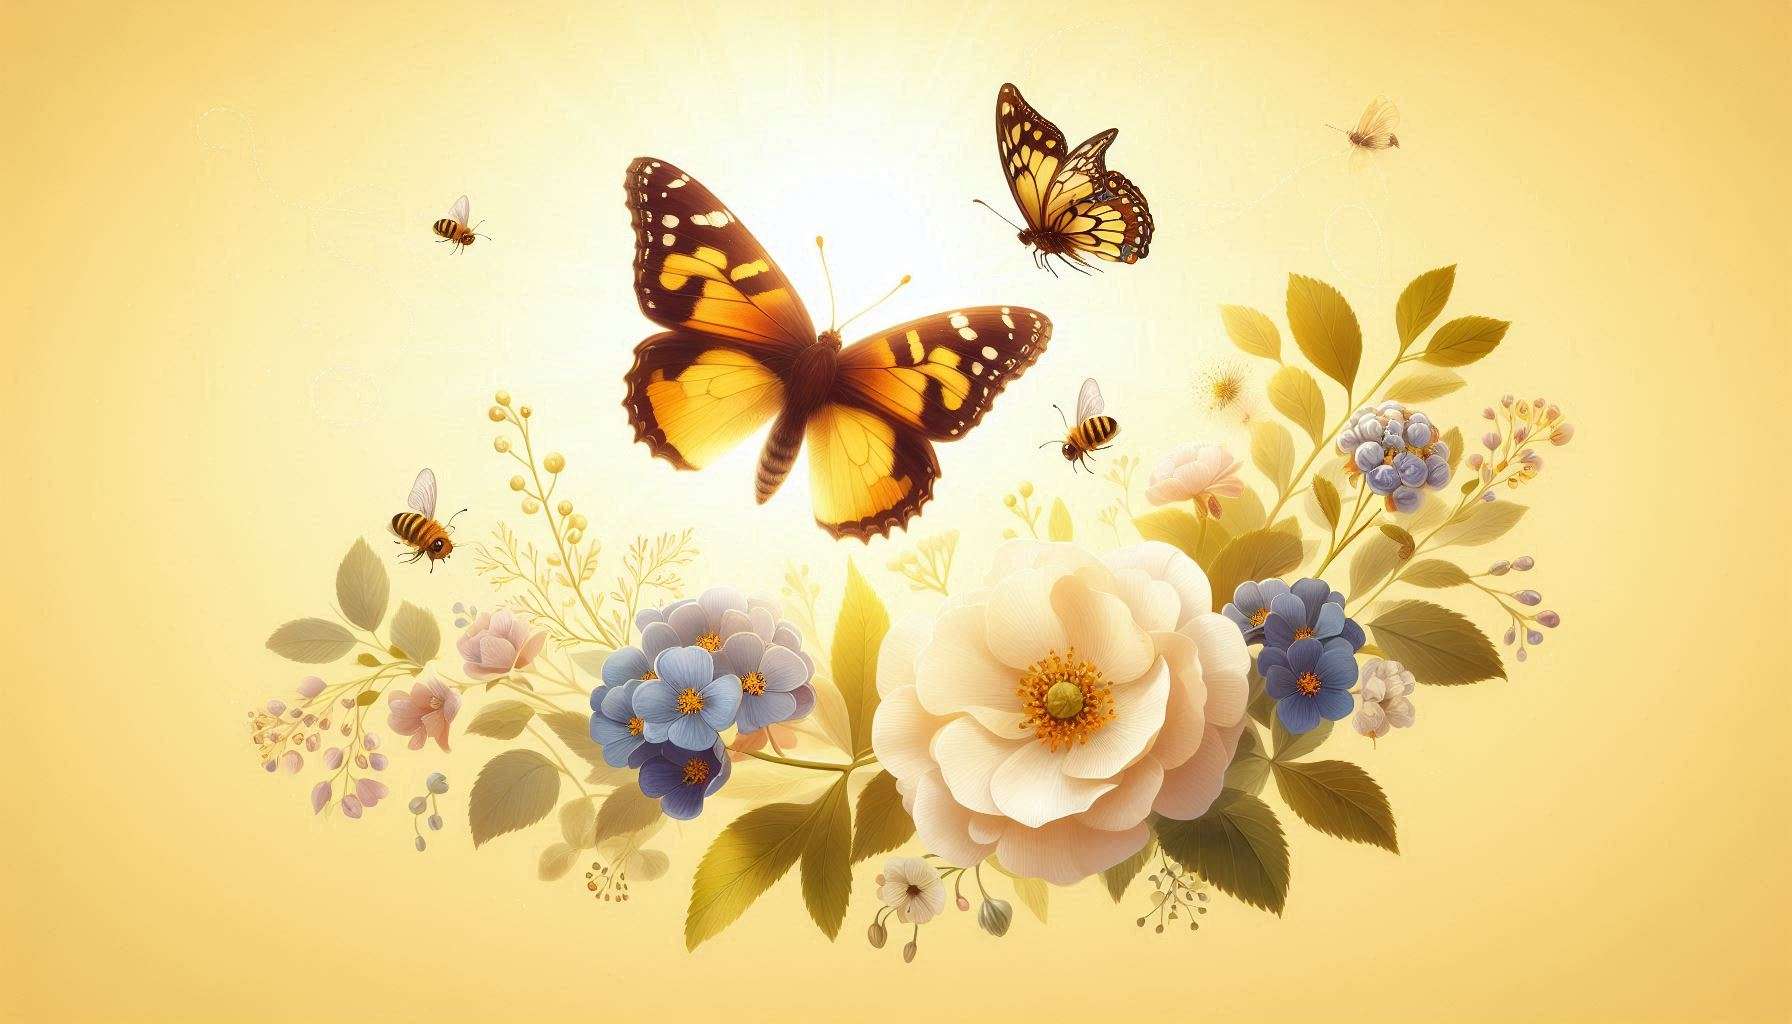 Download Free beautiful light yellow background with flower and butterfly for websites, slideshows, and designs | royalty-free and unlimited use.